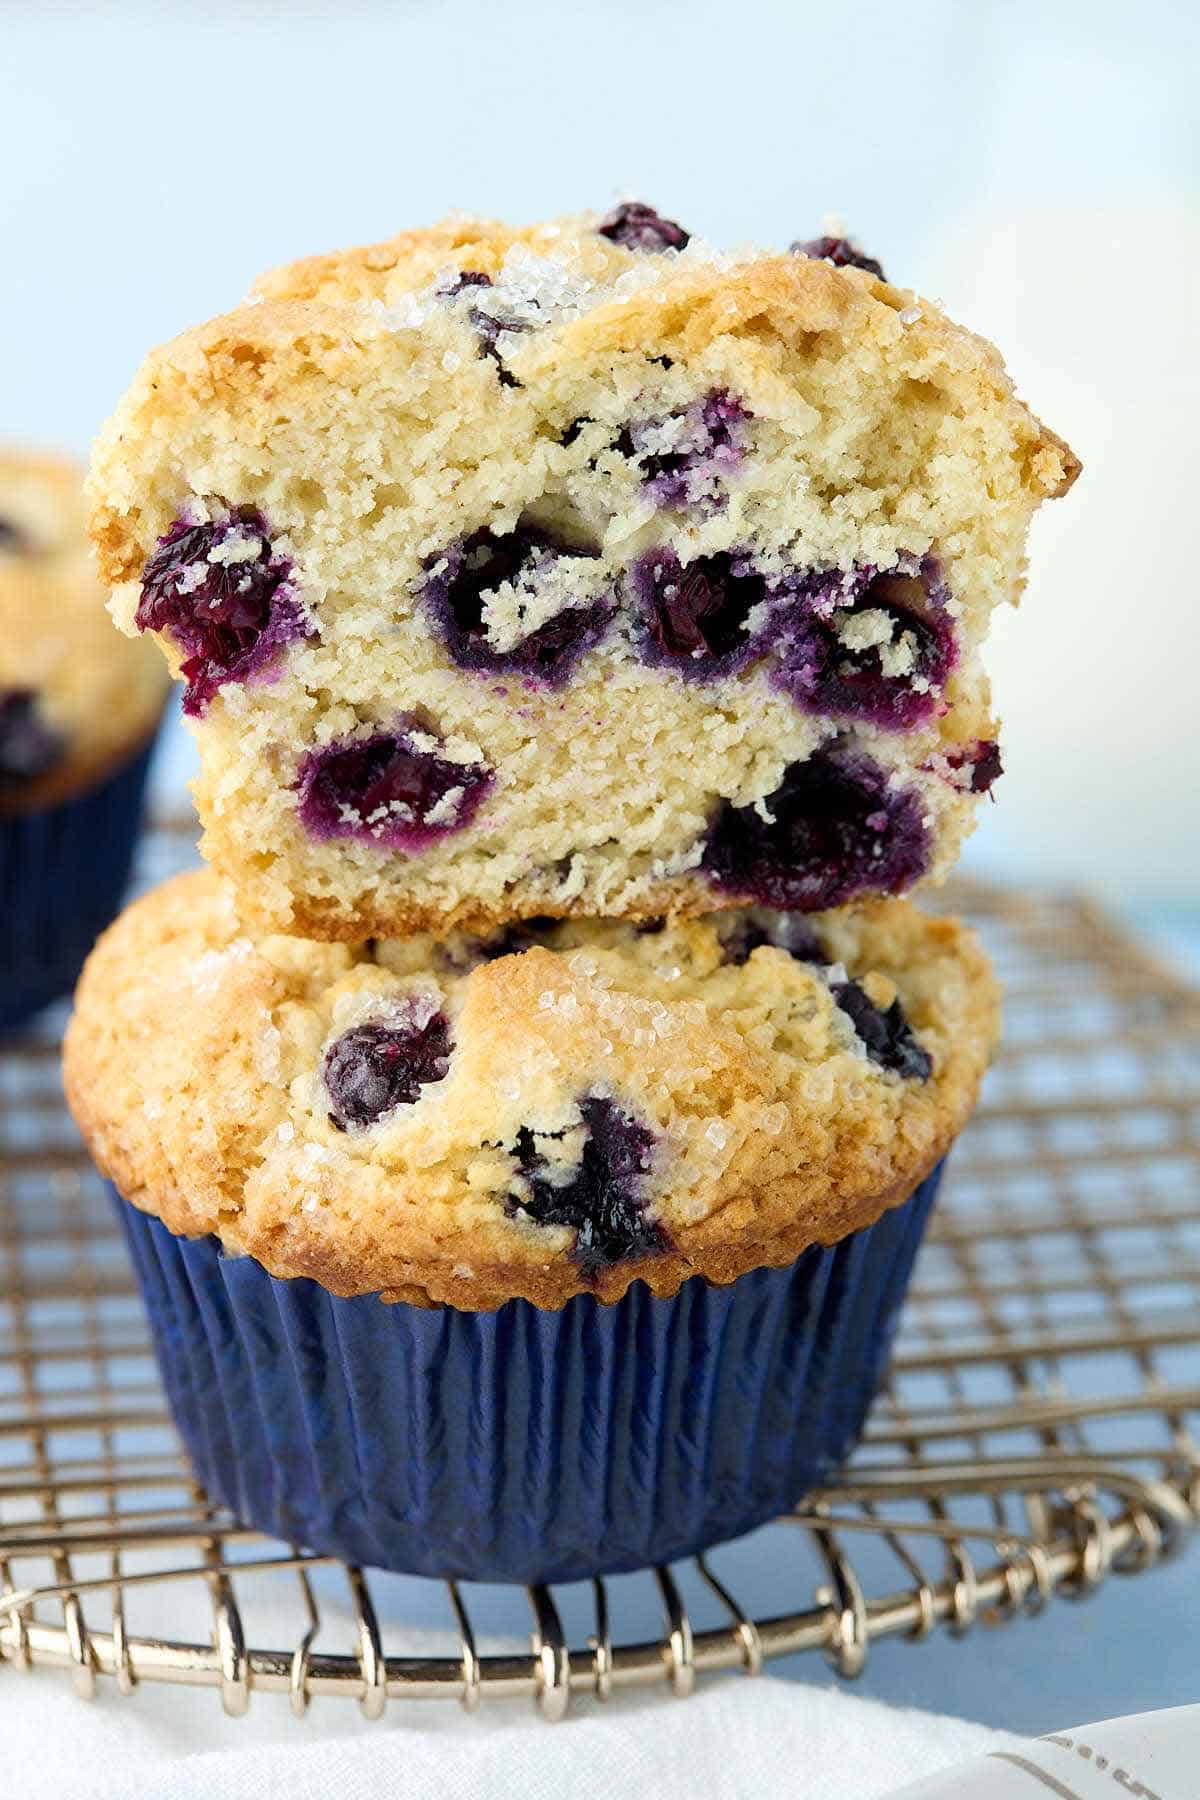 Two buttermilk blueberry muffins stacked with the top muffin cut in half to show the inside.